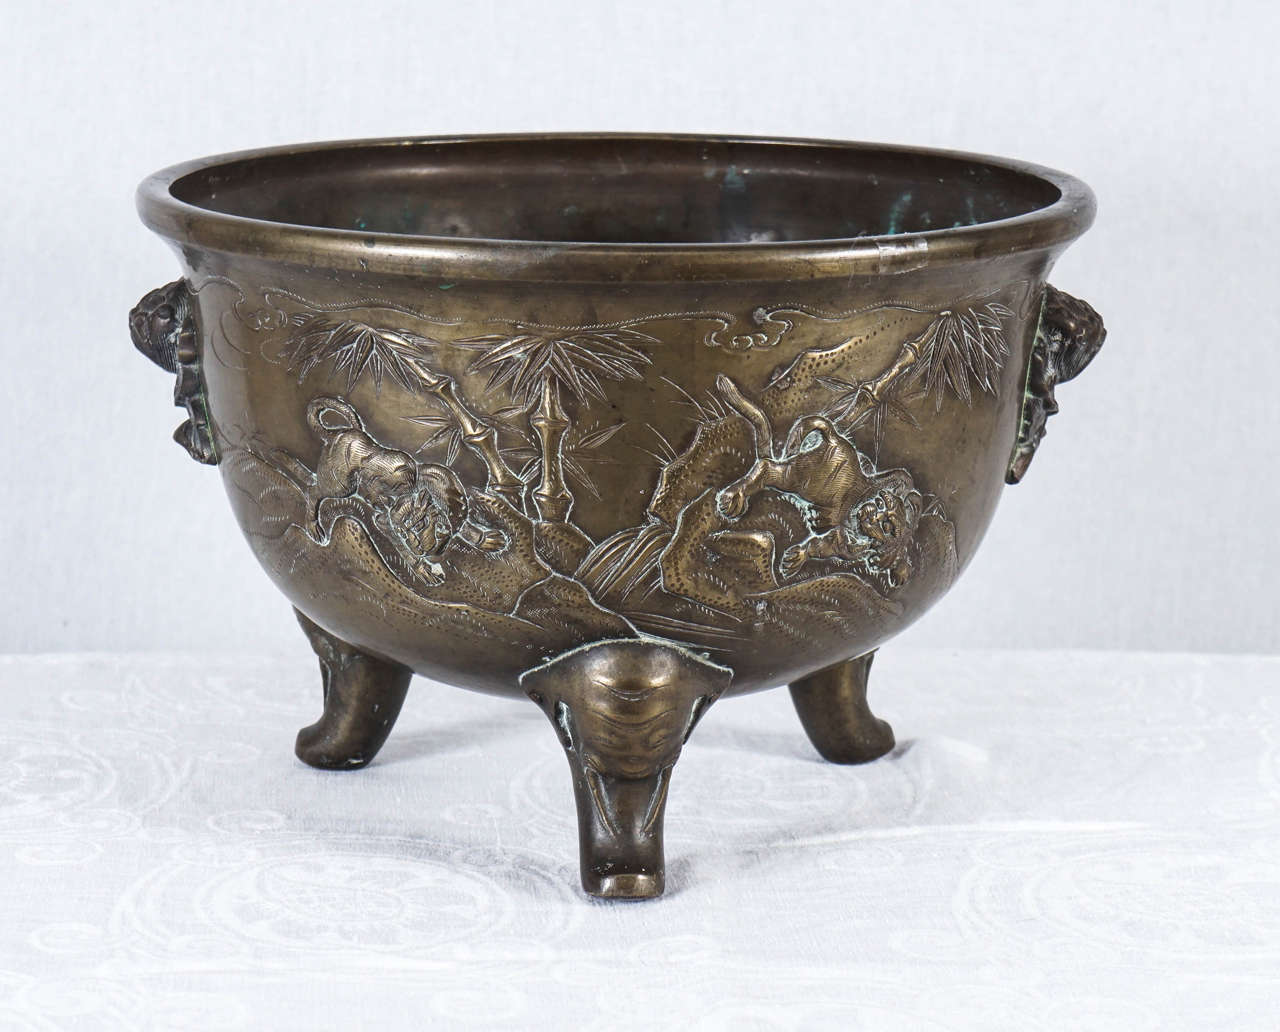 This deeply cast Japanese bronze planter was made in the Meiji period, a time in Japan when the natural order of life was upset by the disbanding of the traditional samurai class. Skills used to create objects for this class were turned to domestic